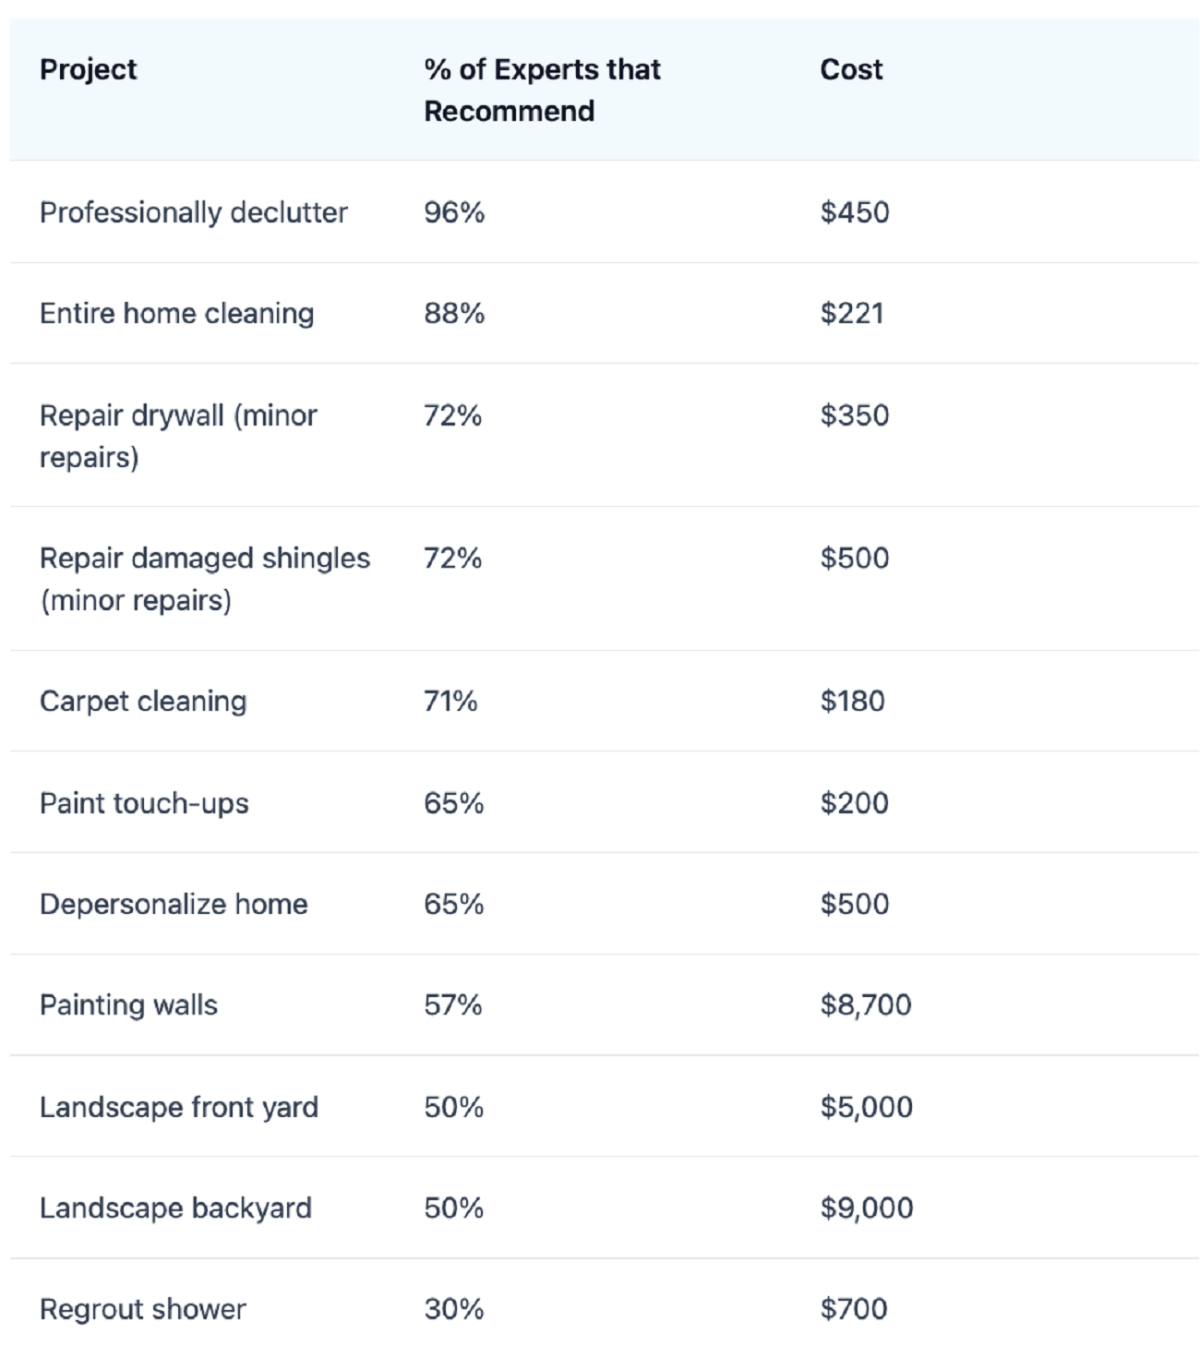 A chart comparing the cost and percentage recommended by experts for various home staging projects